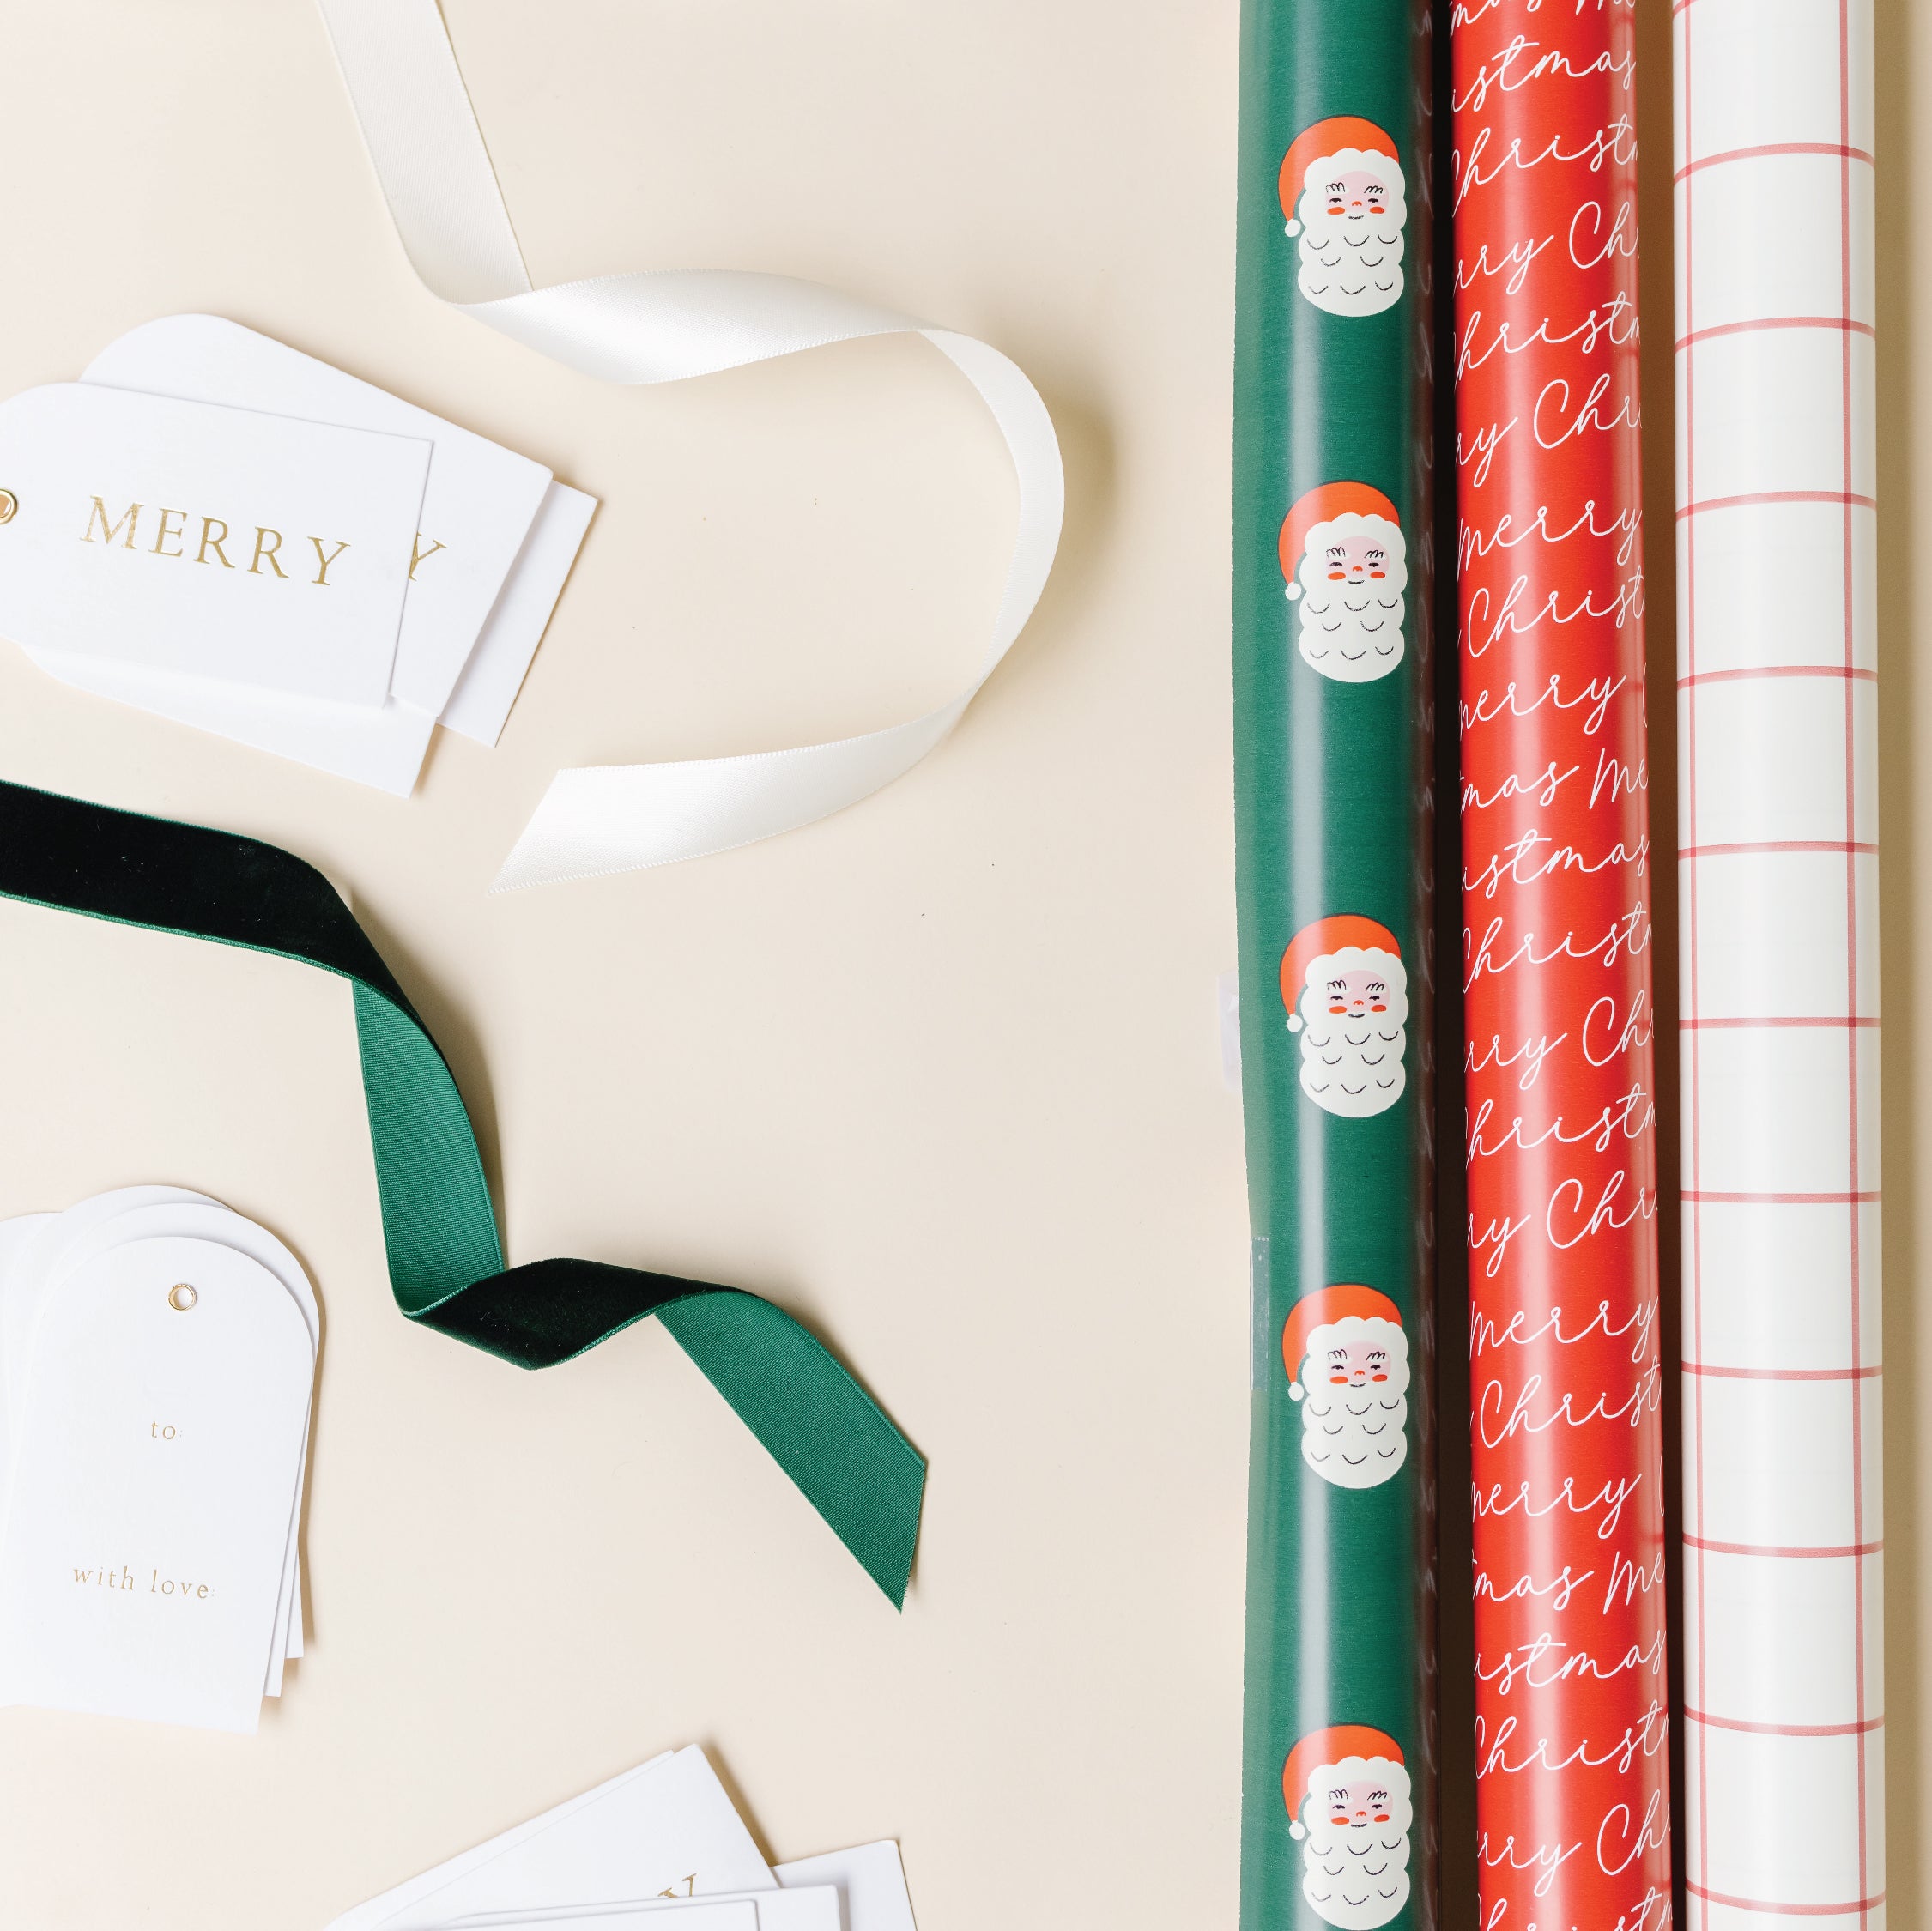 Merry Days Paper Collection // @cratepaper #cpmerrydays  Crate paper,  Christmas wrapping paper, Holiday gift wrap